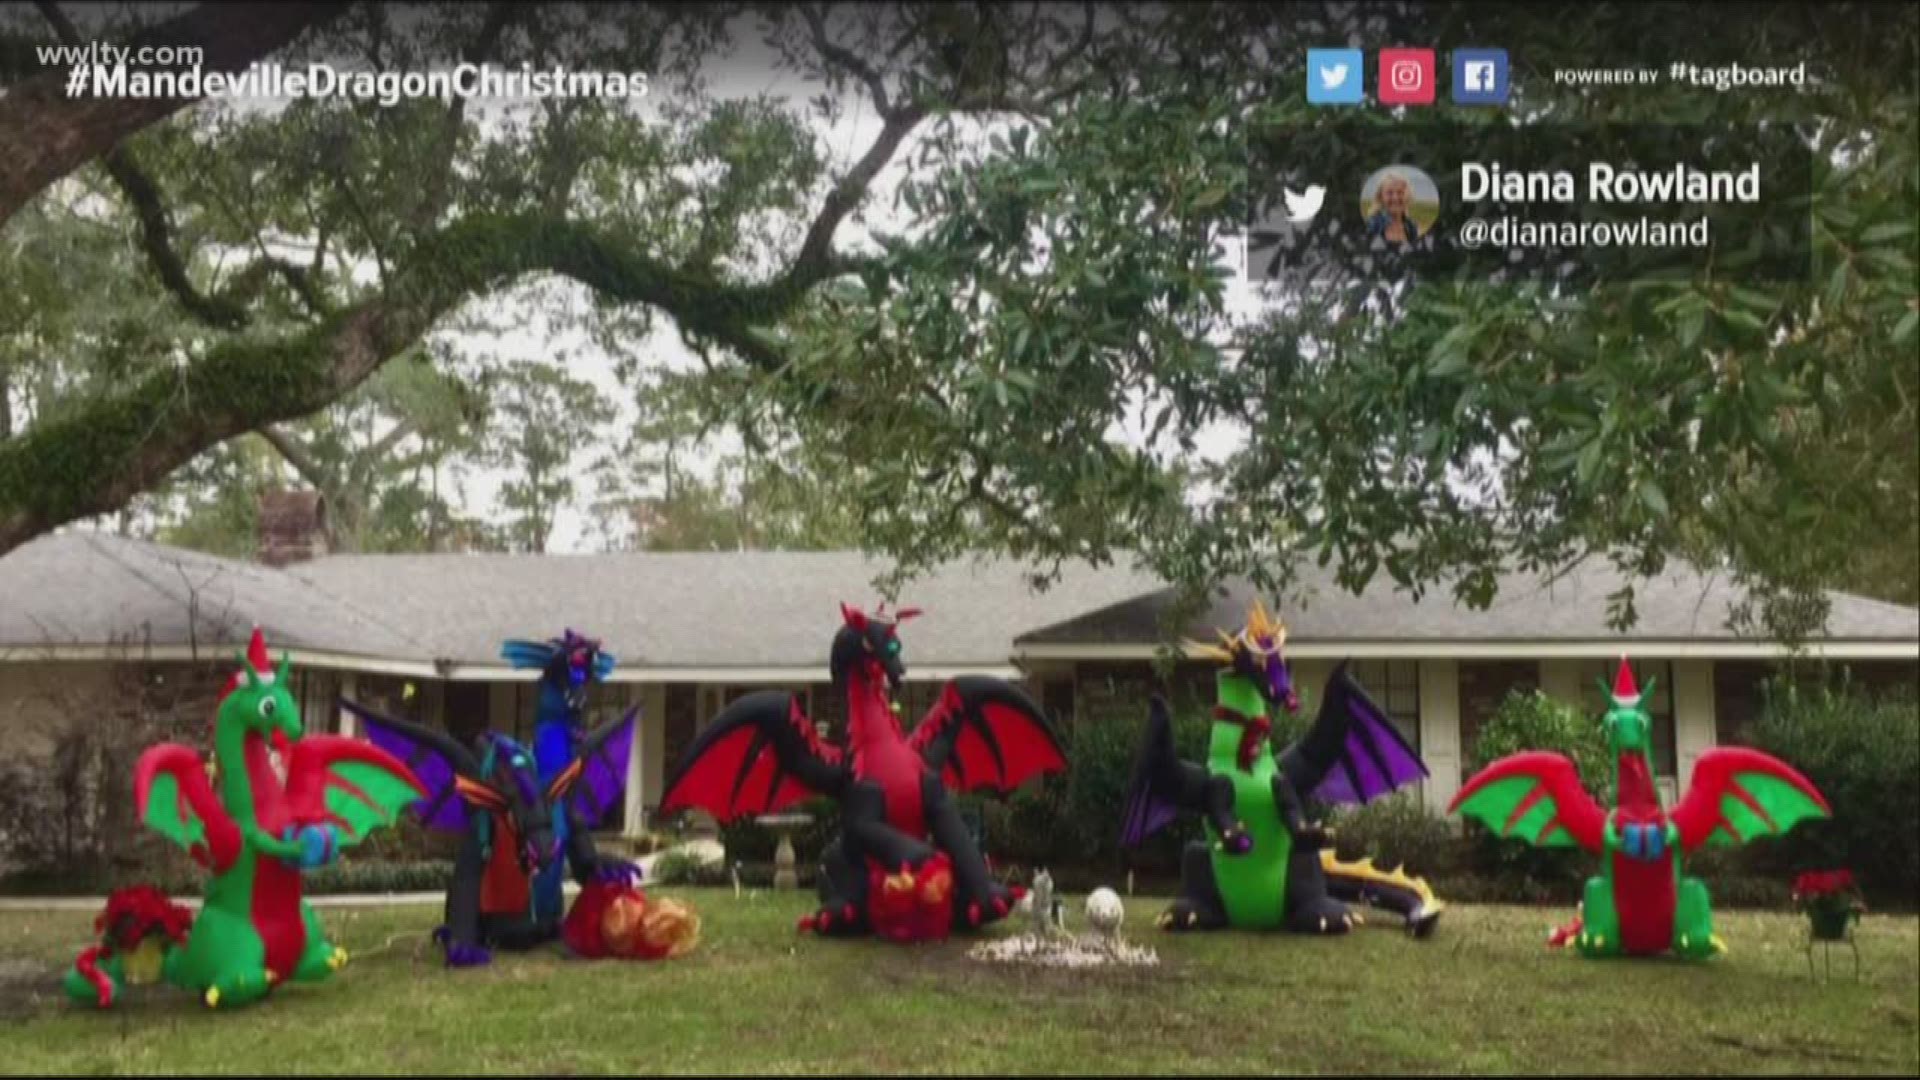 The woman was told her lawn display was not acceptable, so she added more dragons.